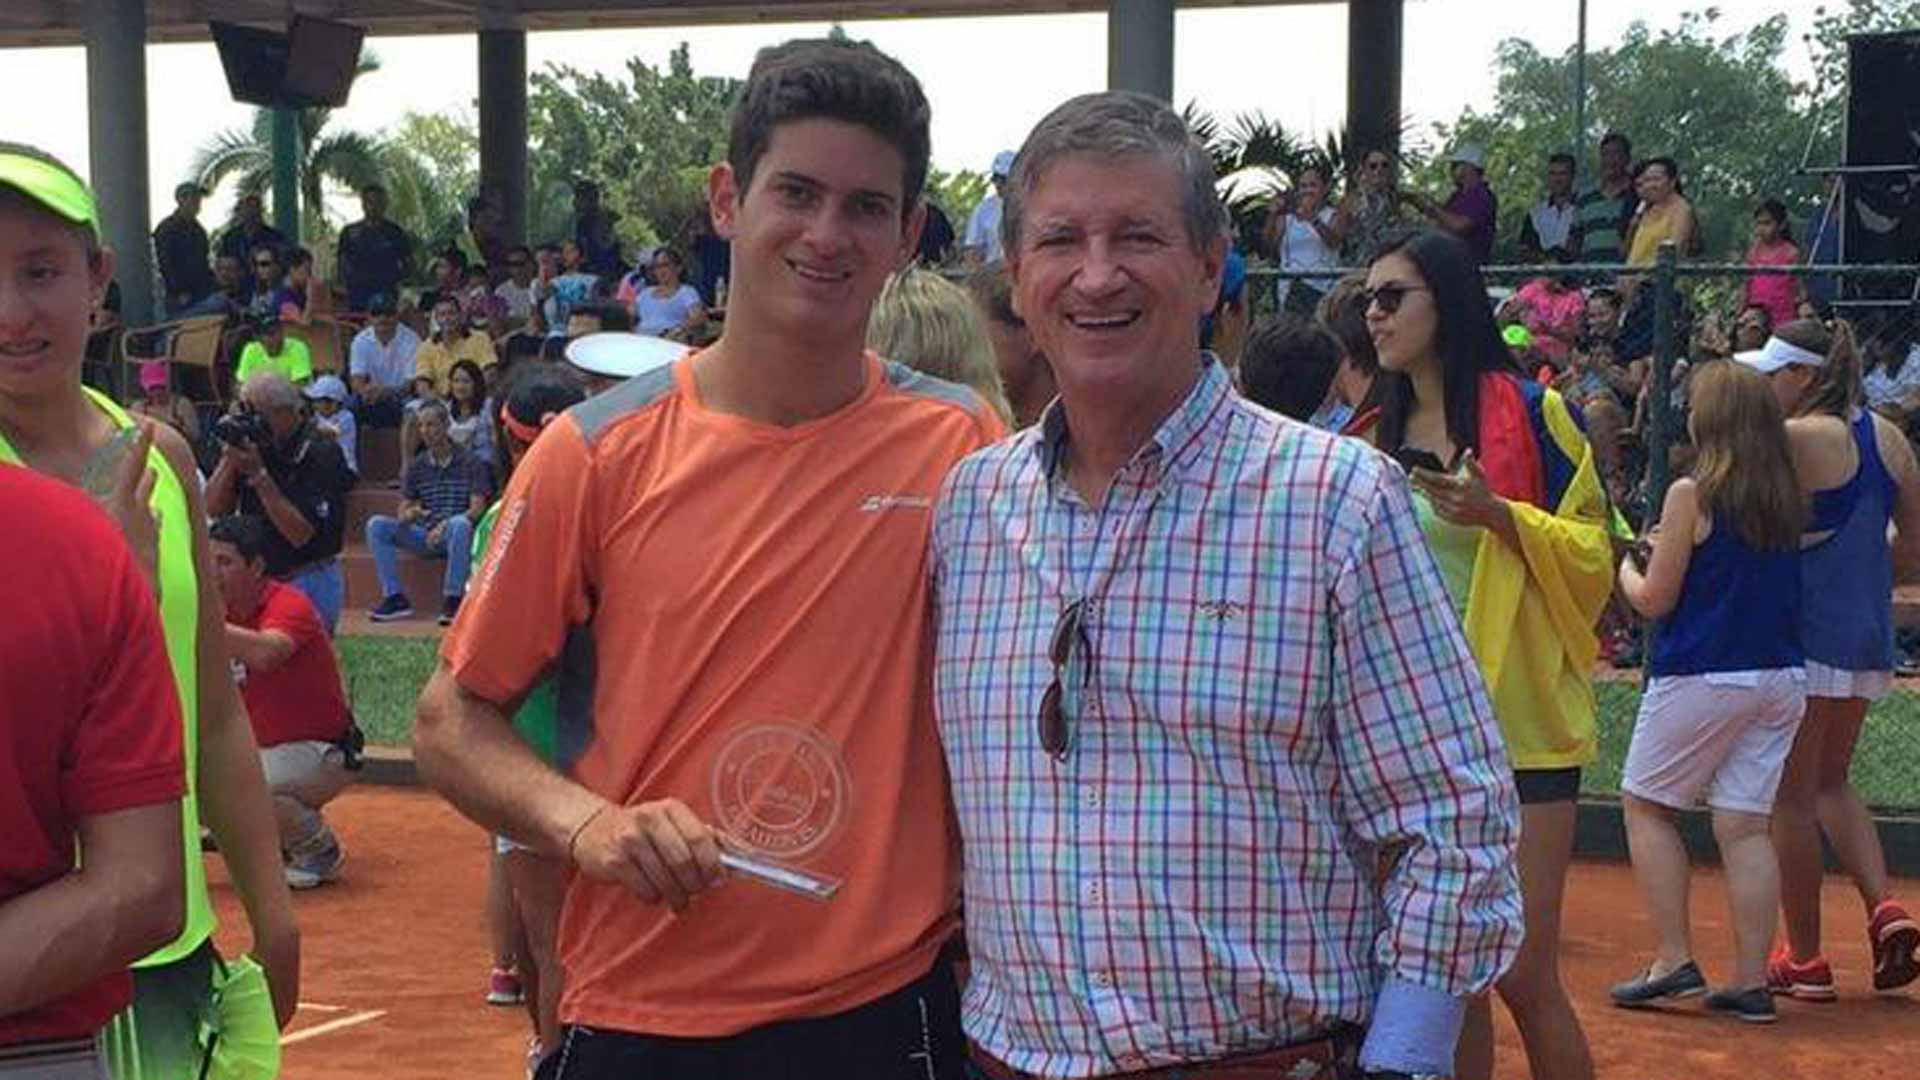 <a href='https://www.atptour.com/en/players/nicolas-mejia/m0aw/overview'>Nicolas Mejia</a> at age 16 with his father Gustavo.